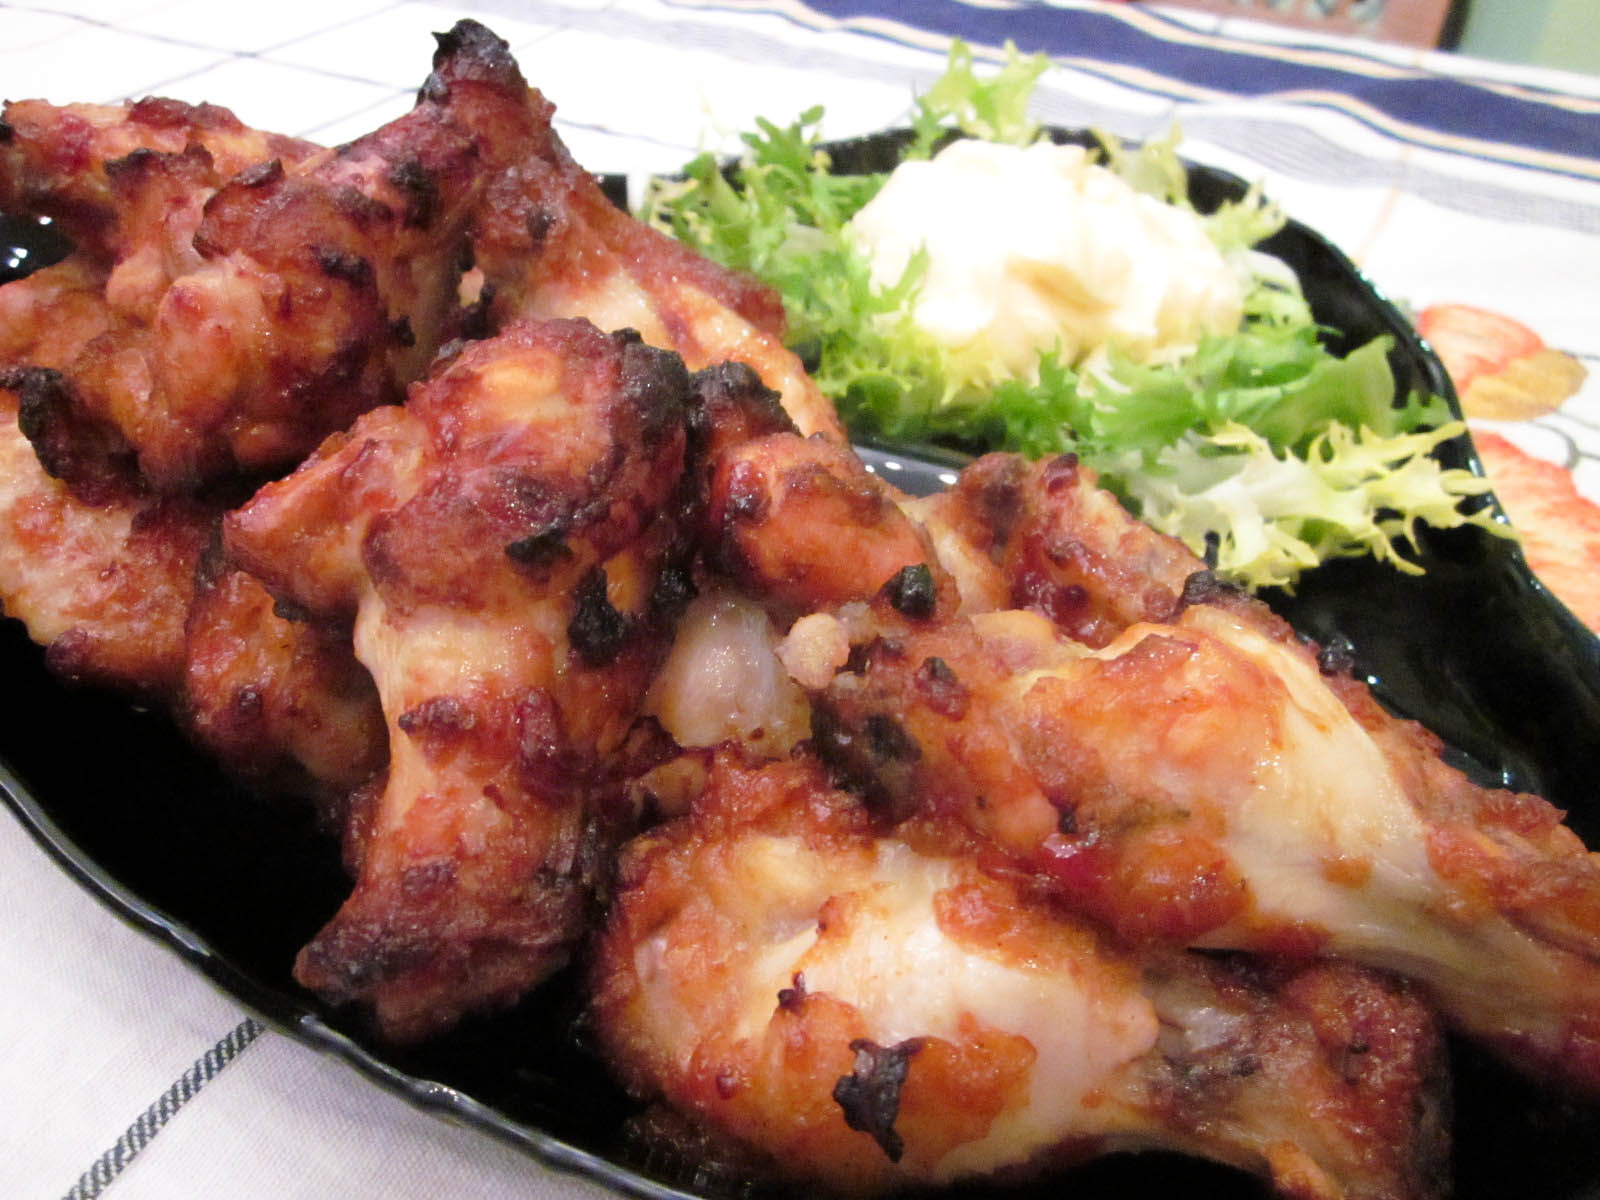 278883724036771289003862232709 Red hot Thai sauce chicken wings - 19979372023375638622329052600929702 - DolceSalato  ë©')µ  Italy ©') ©')µß\ 